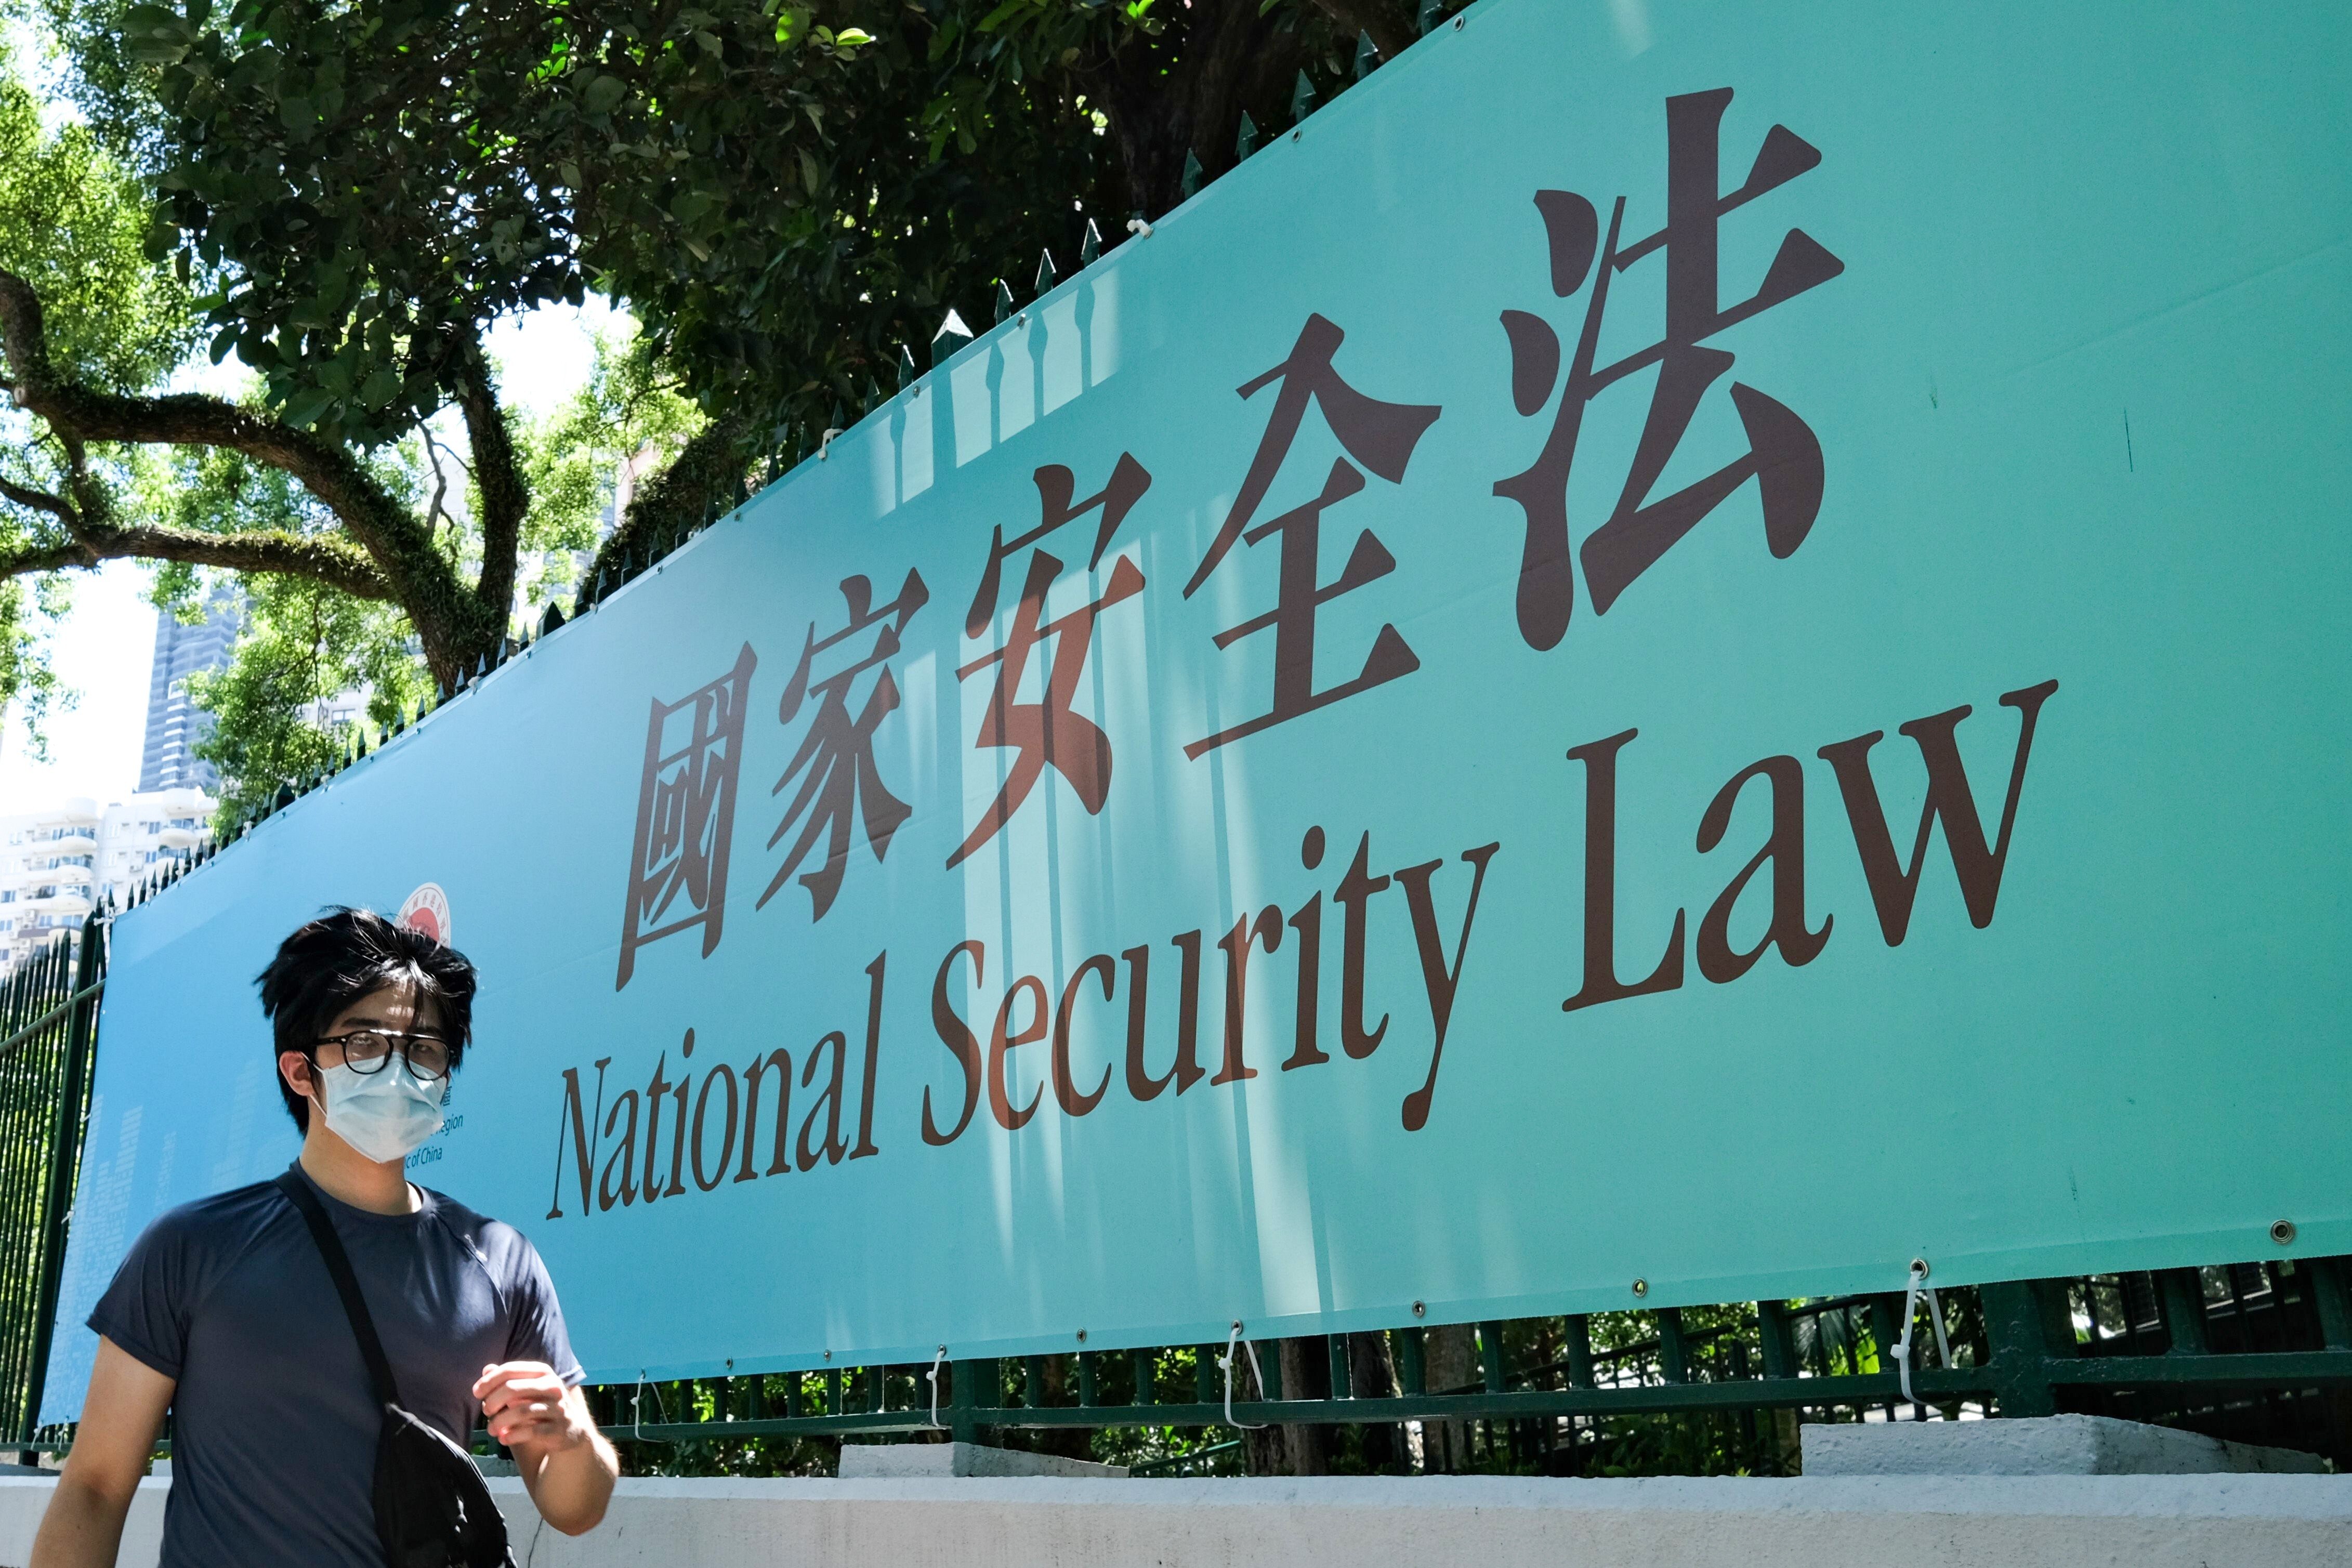 Critics say the national security law imposed by Beijing represents an erosion of Hong Jong’s freedoms. Photo: AFP